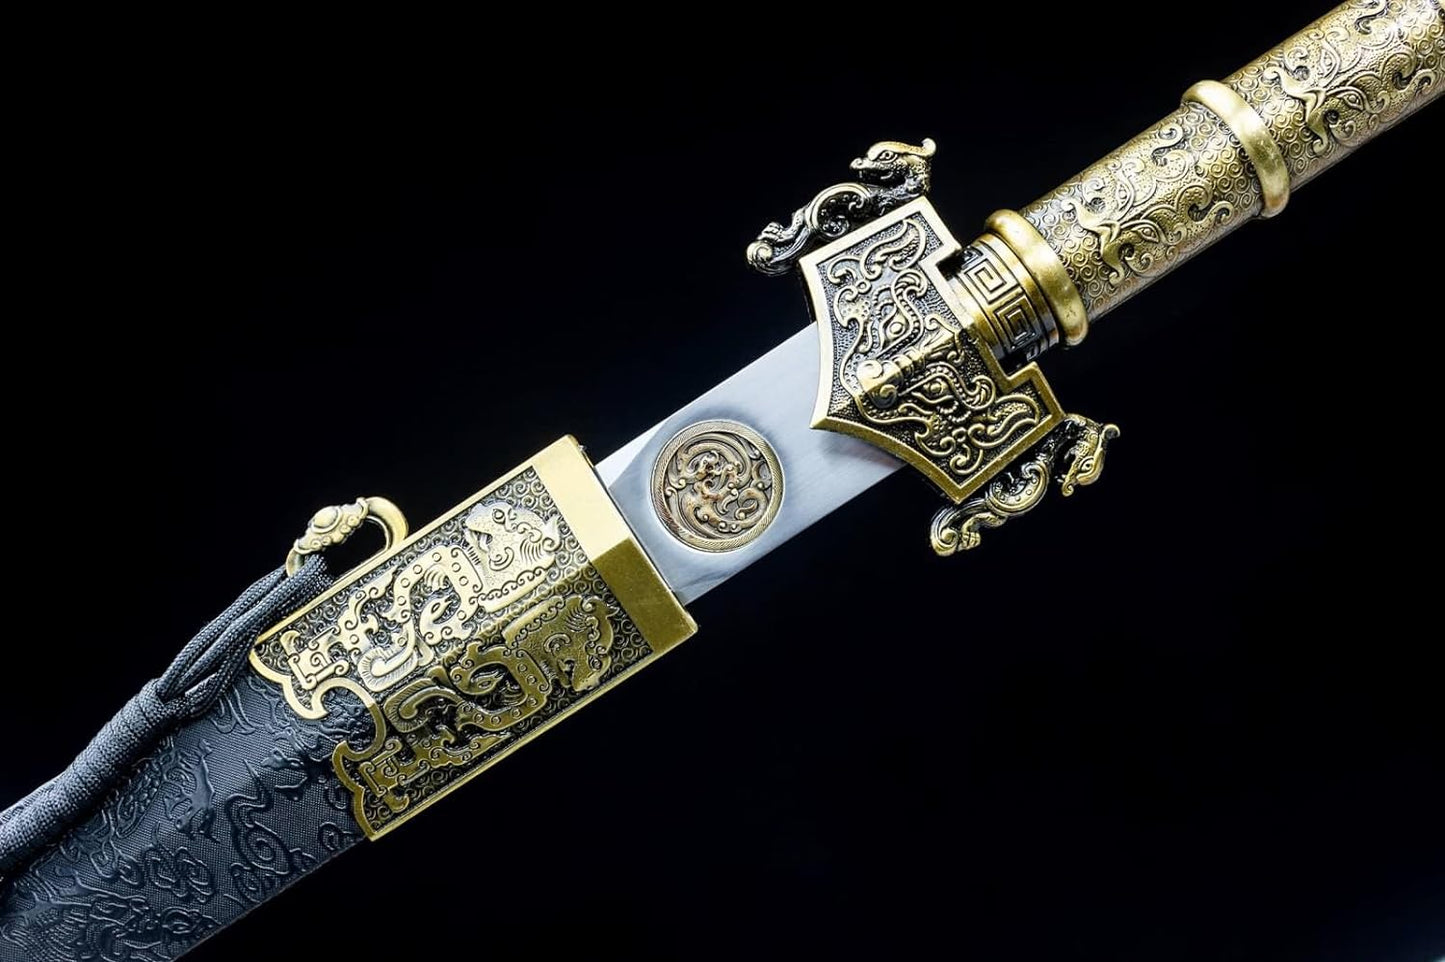 Authentic Han Jian Sword with High Carbon Steel Blade - Alloy Fittings